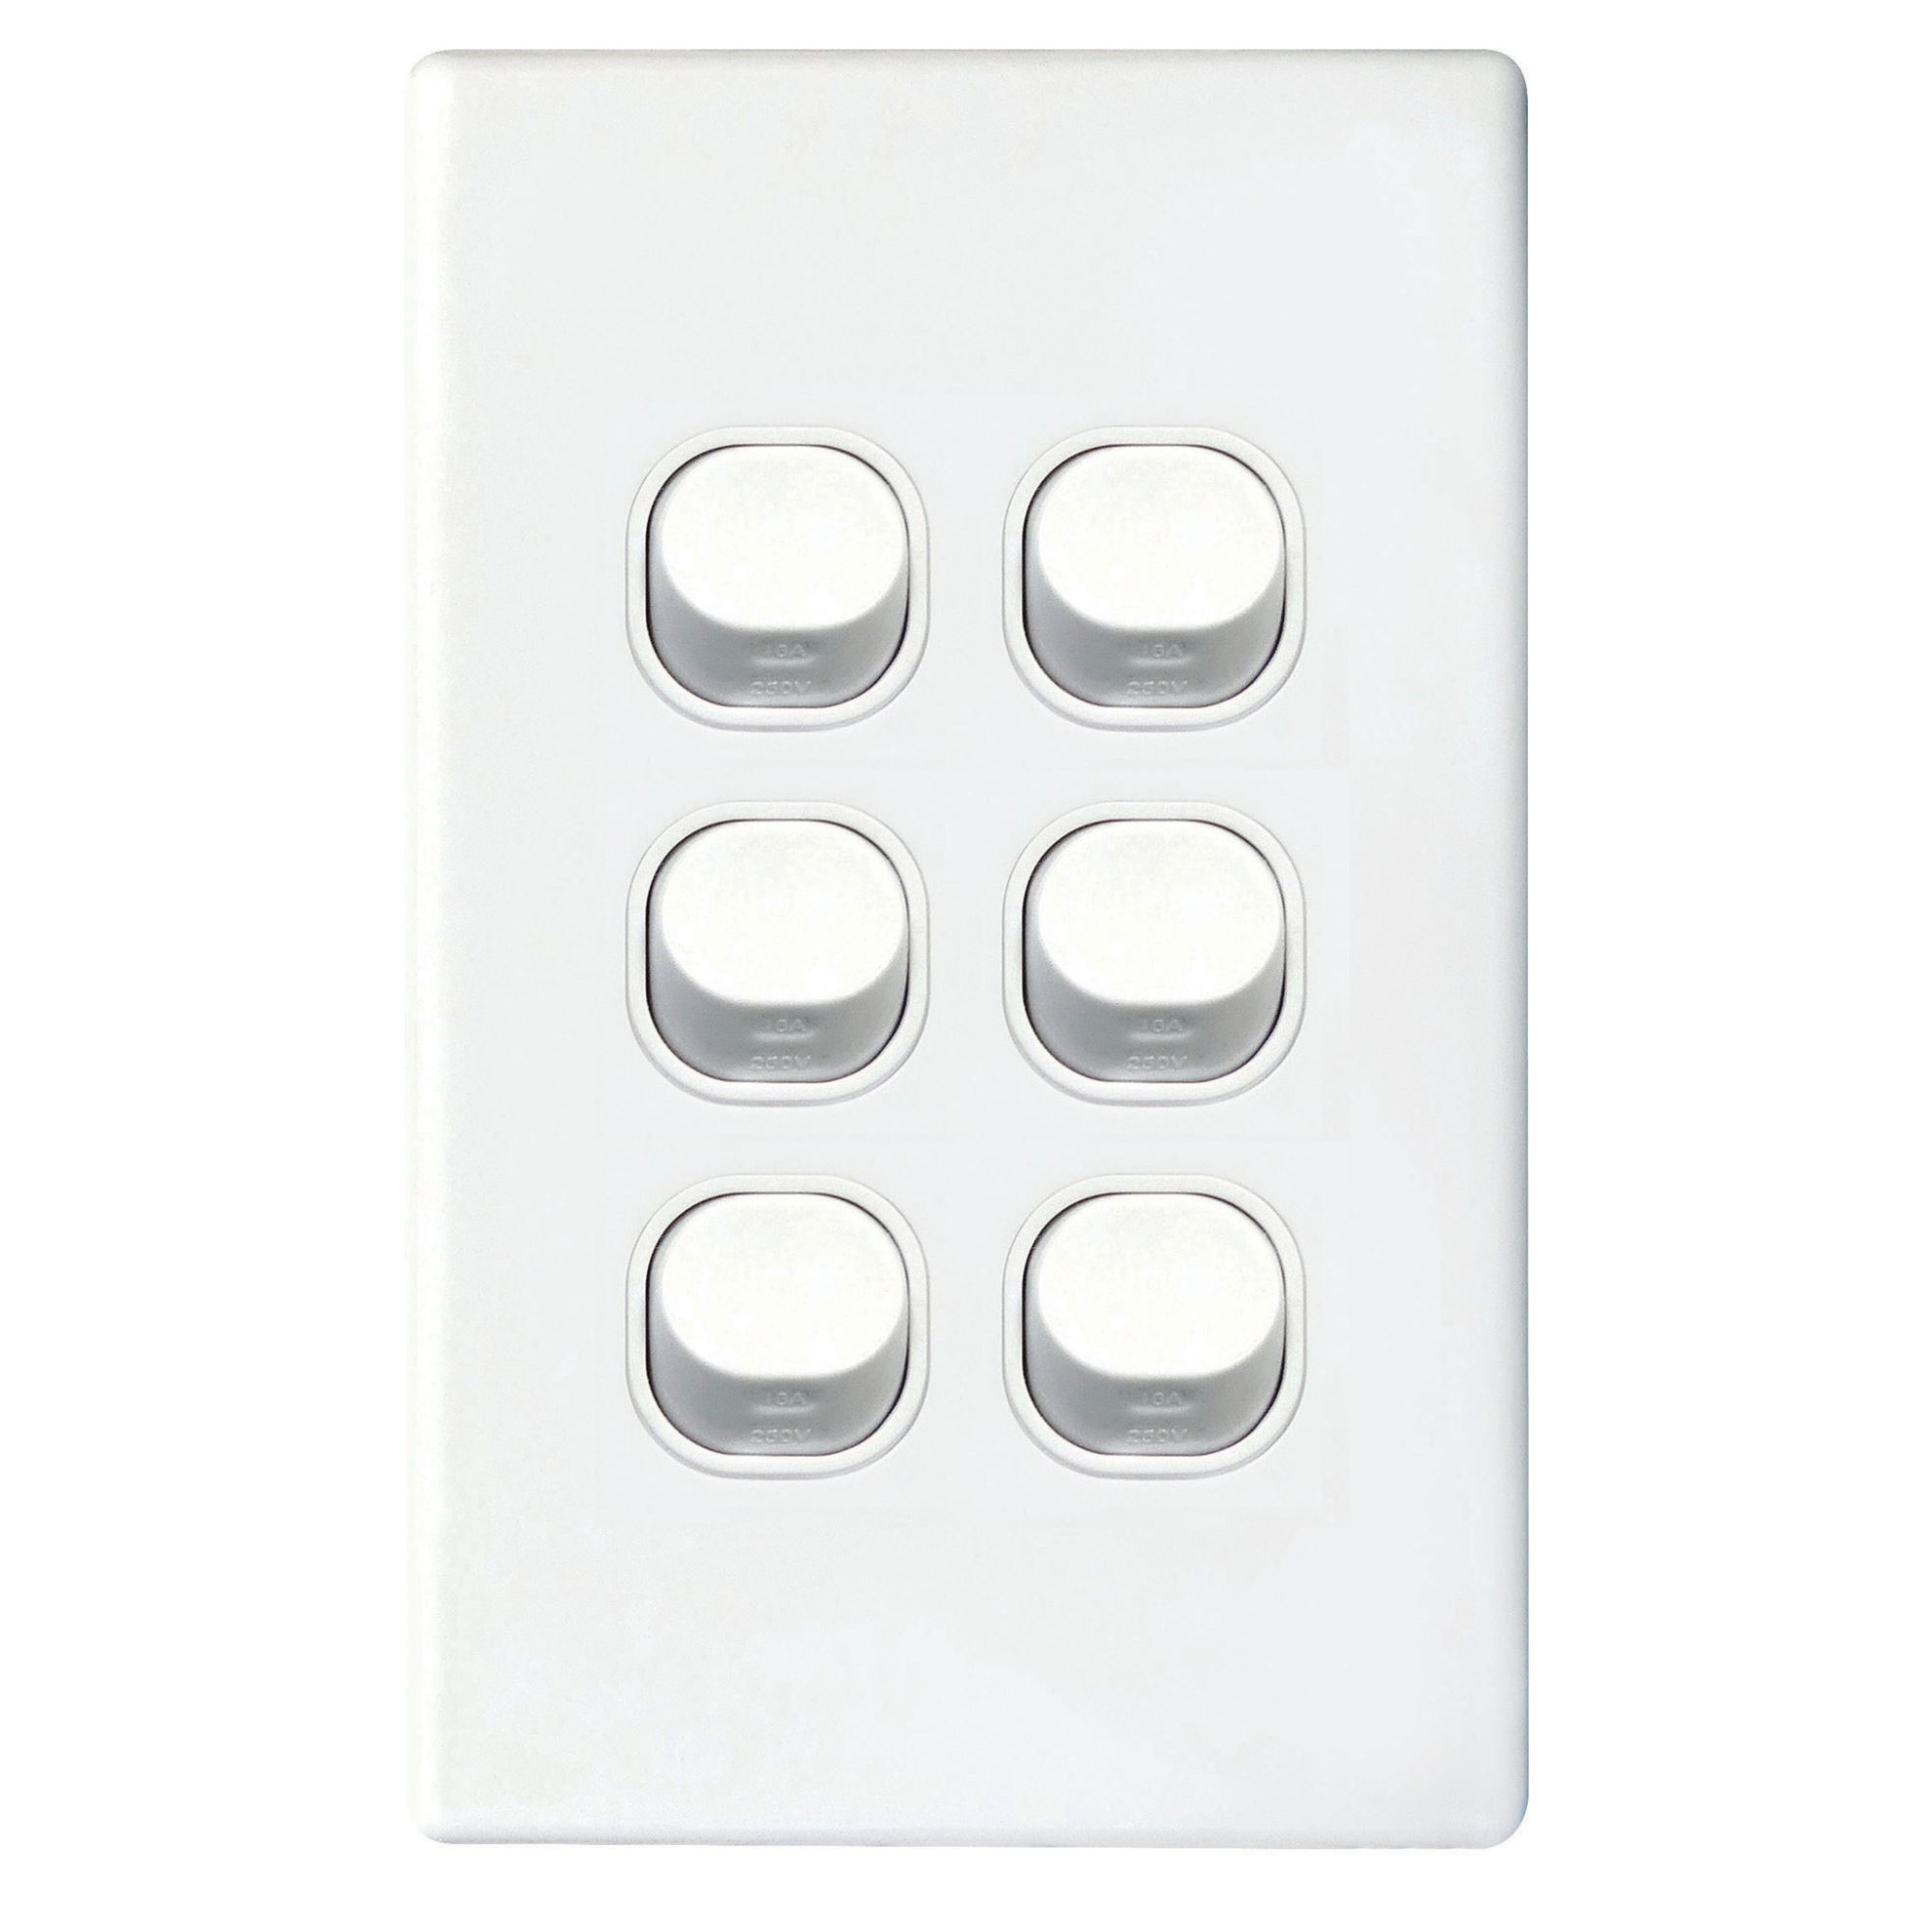 6Gang 16Amp Wall Switch - White